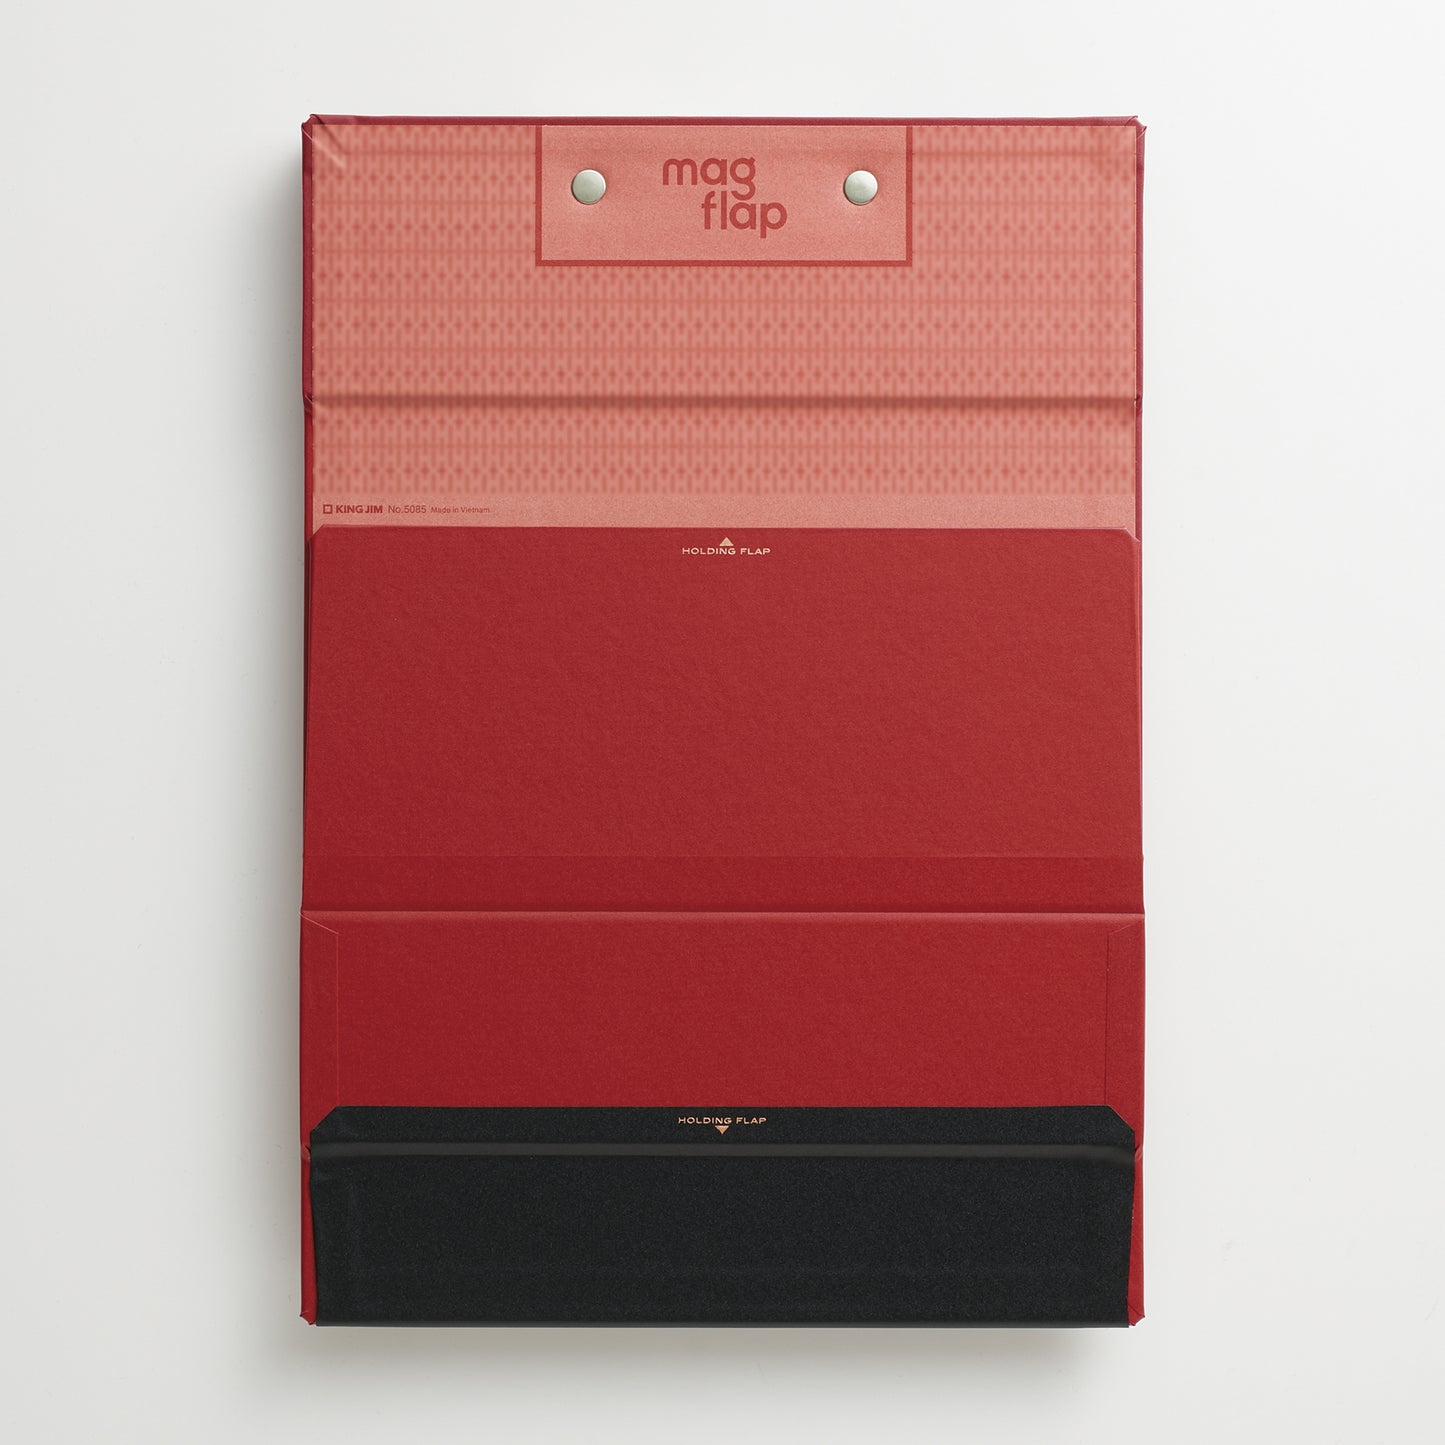 "magflap" Clip Board red